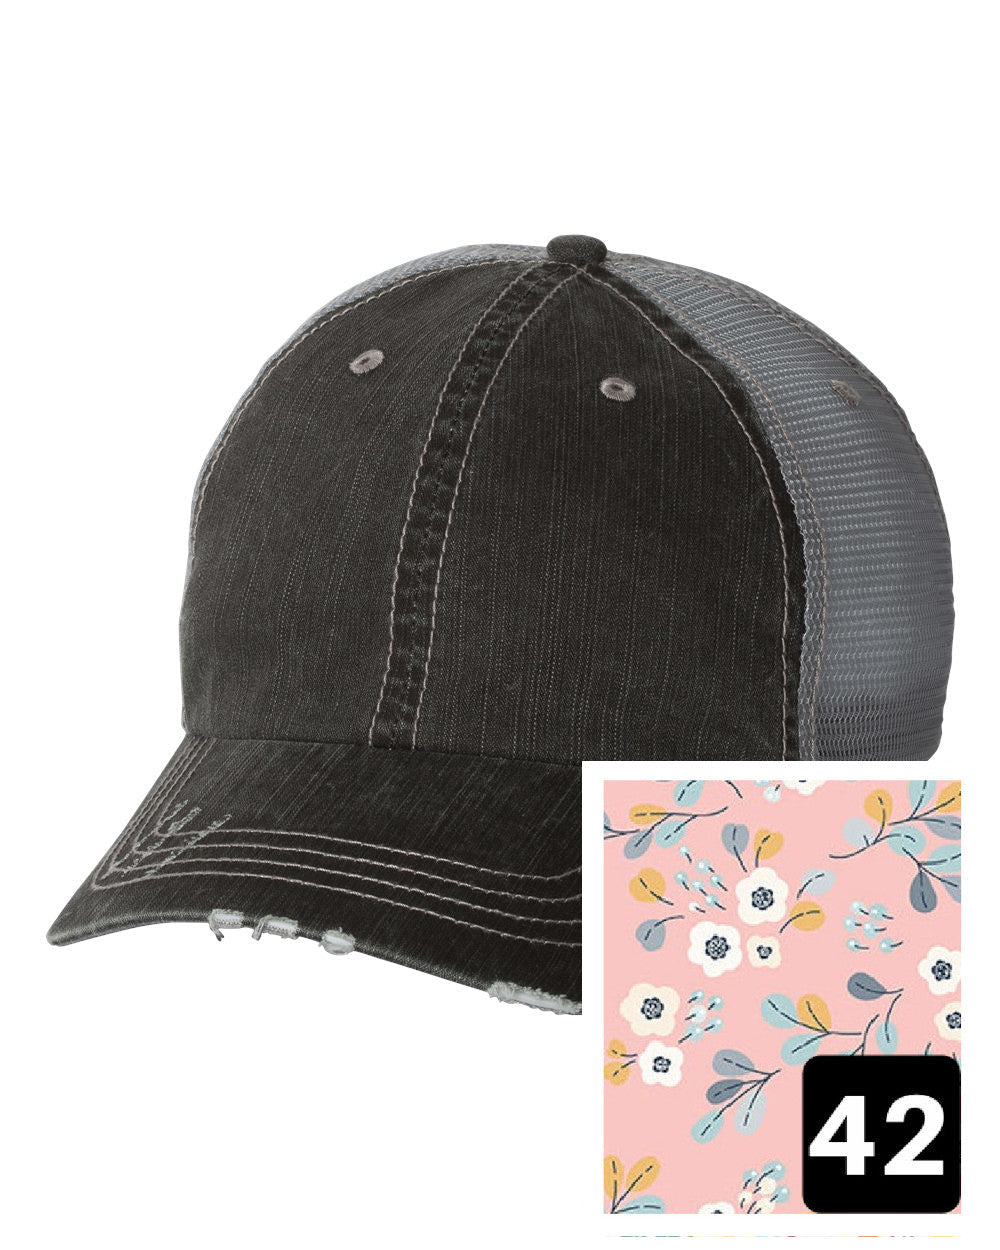 gray distressed trucker hat with light blue and pink mosaic fabric state of Iowa